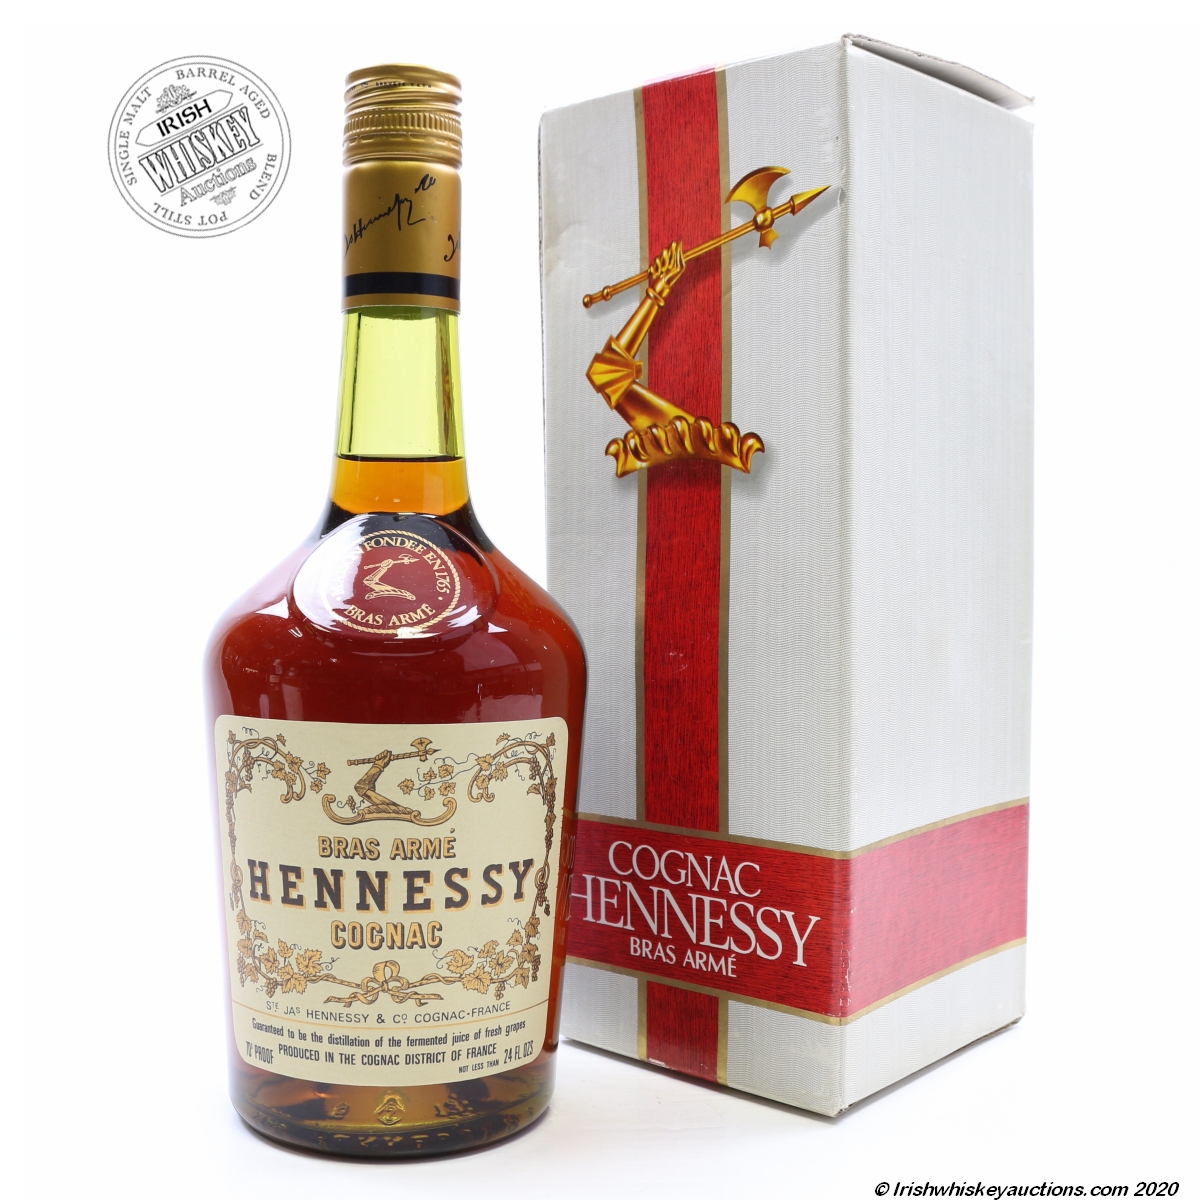 Hennessy Bras Arme - Bot.1970s : The Whisky Exchange